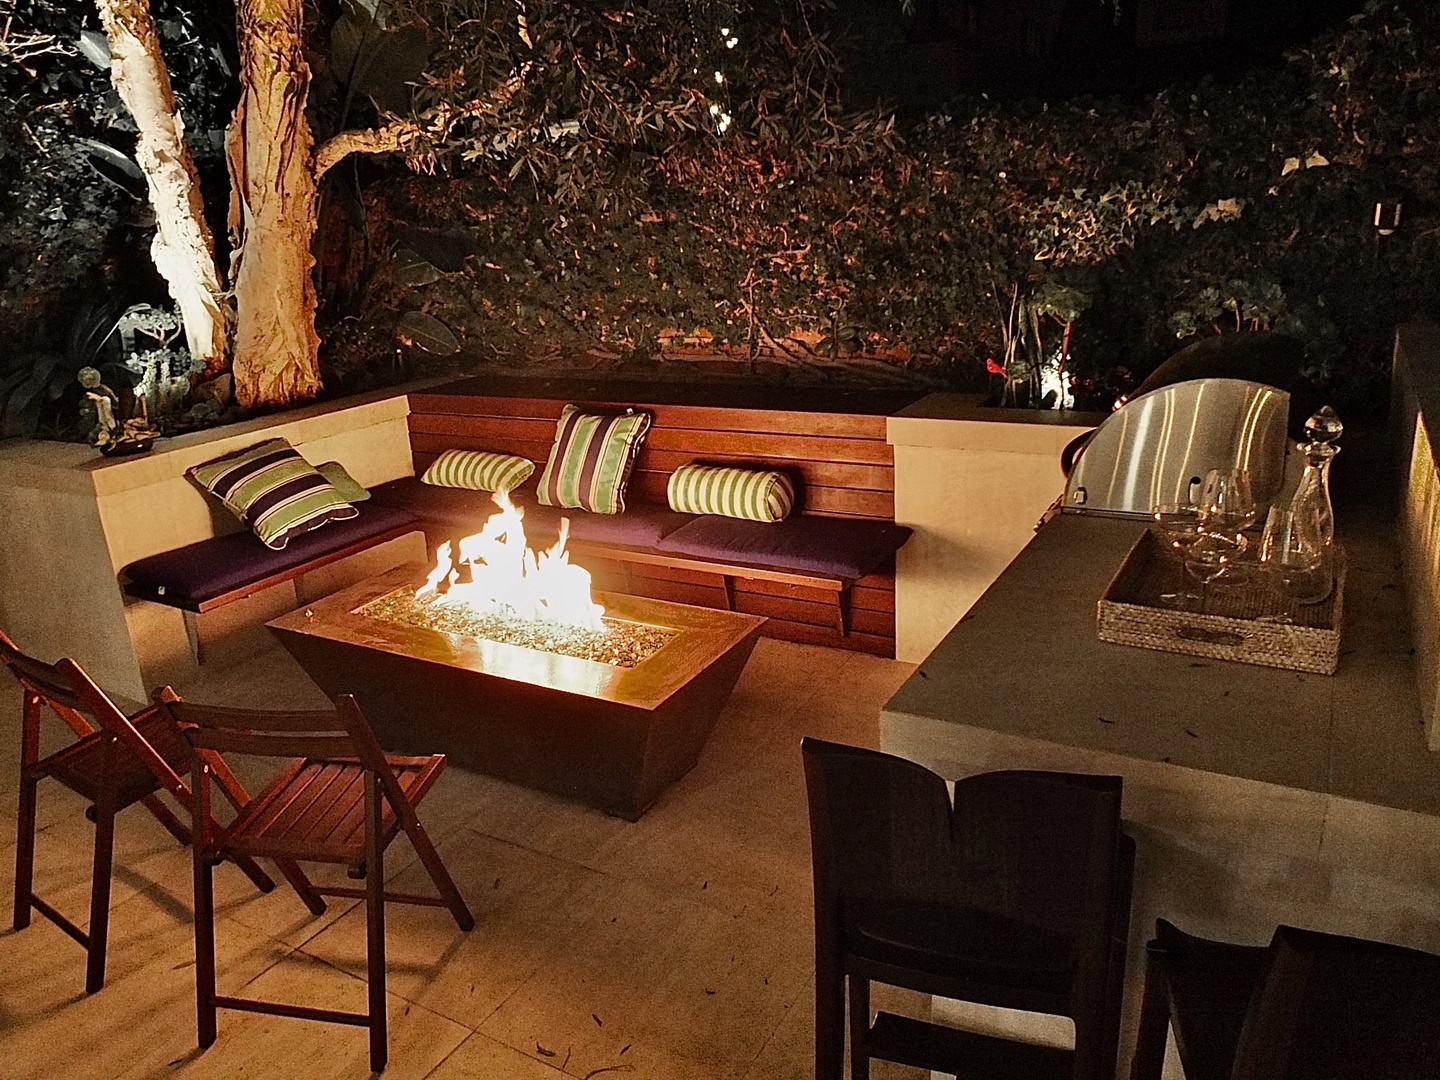 Savor the enchanting ambiance as you gather around the firepit